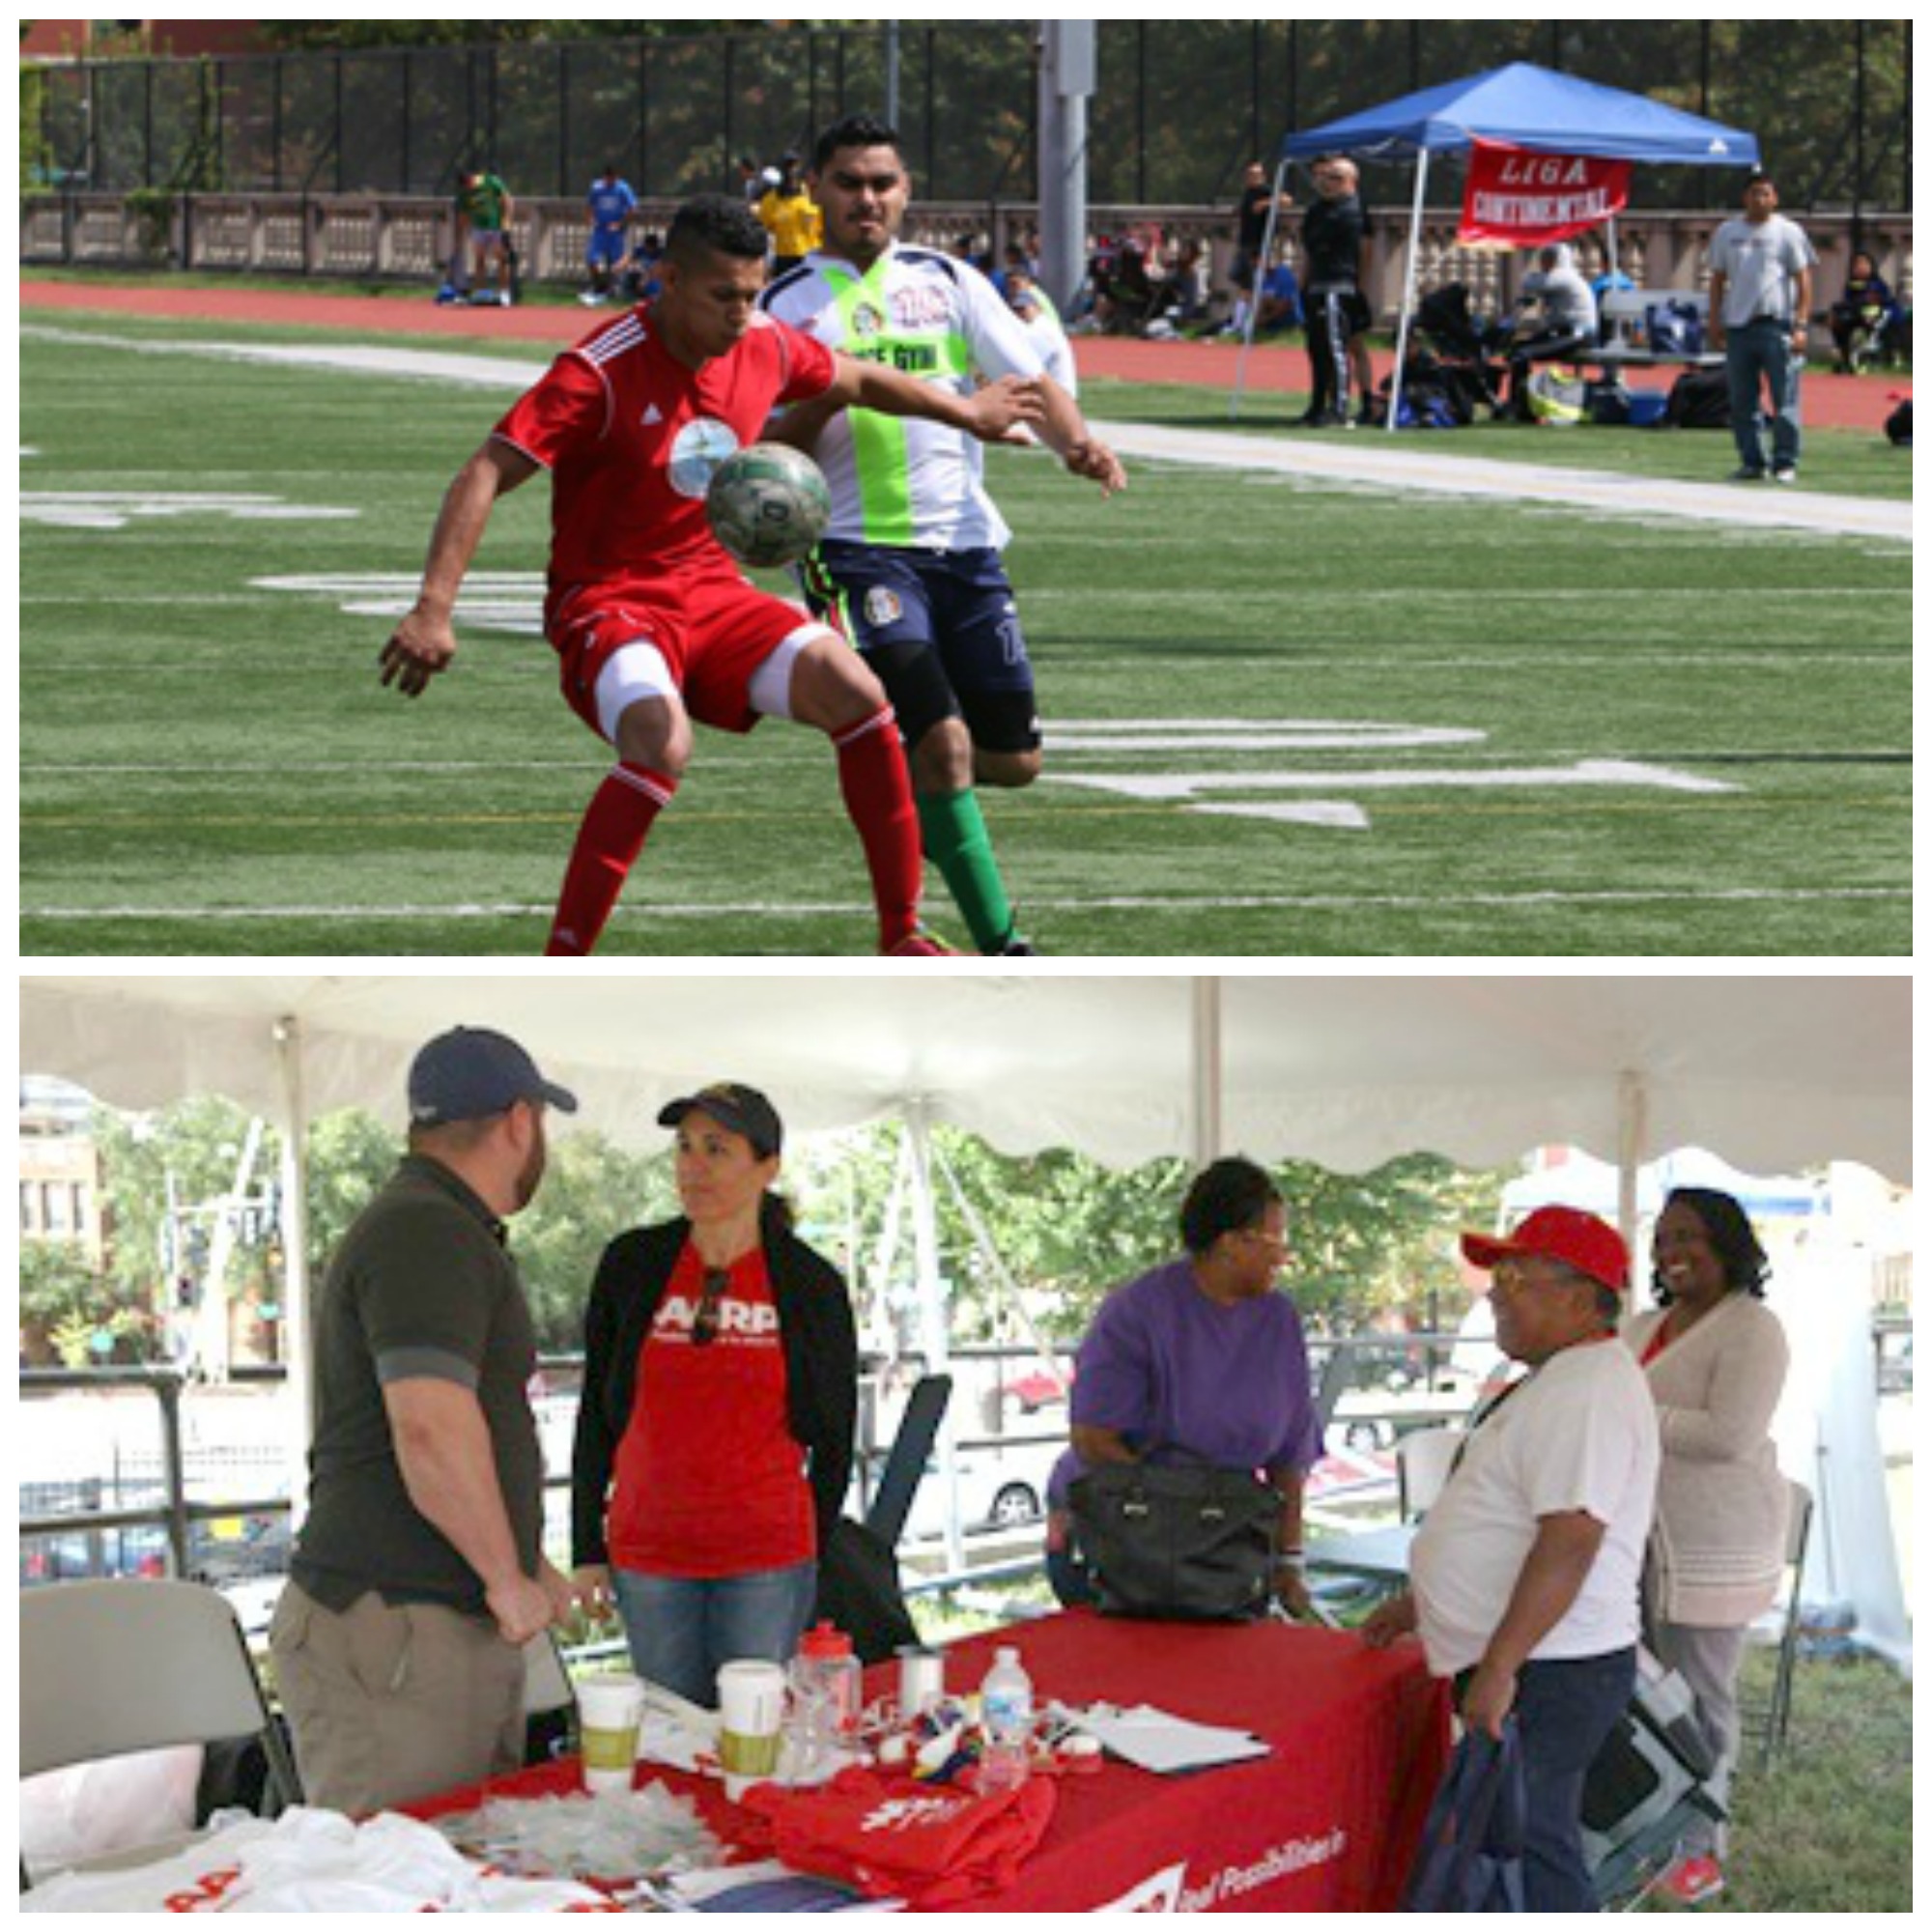 Booth & Soccer Action Collage